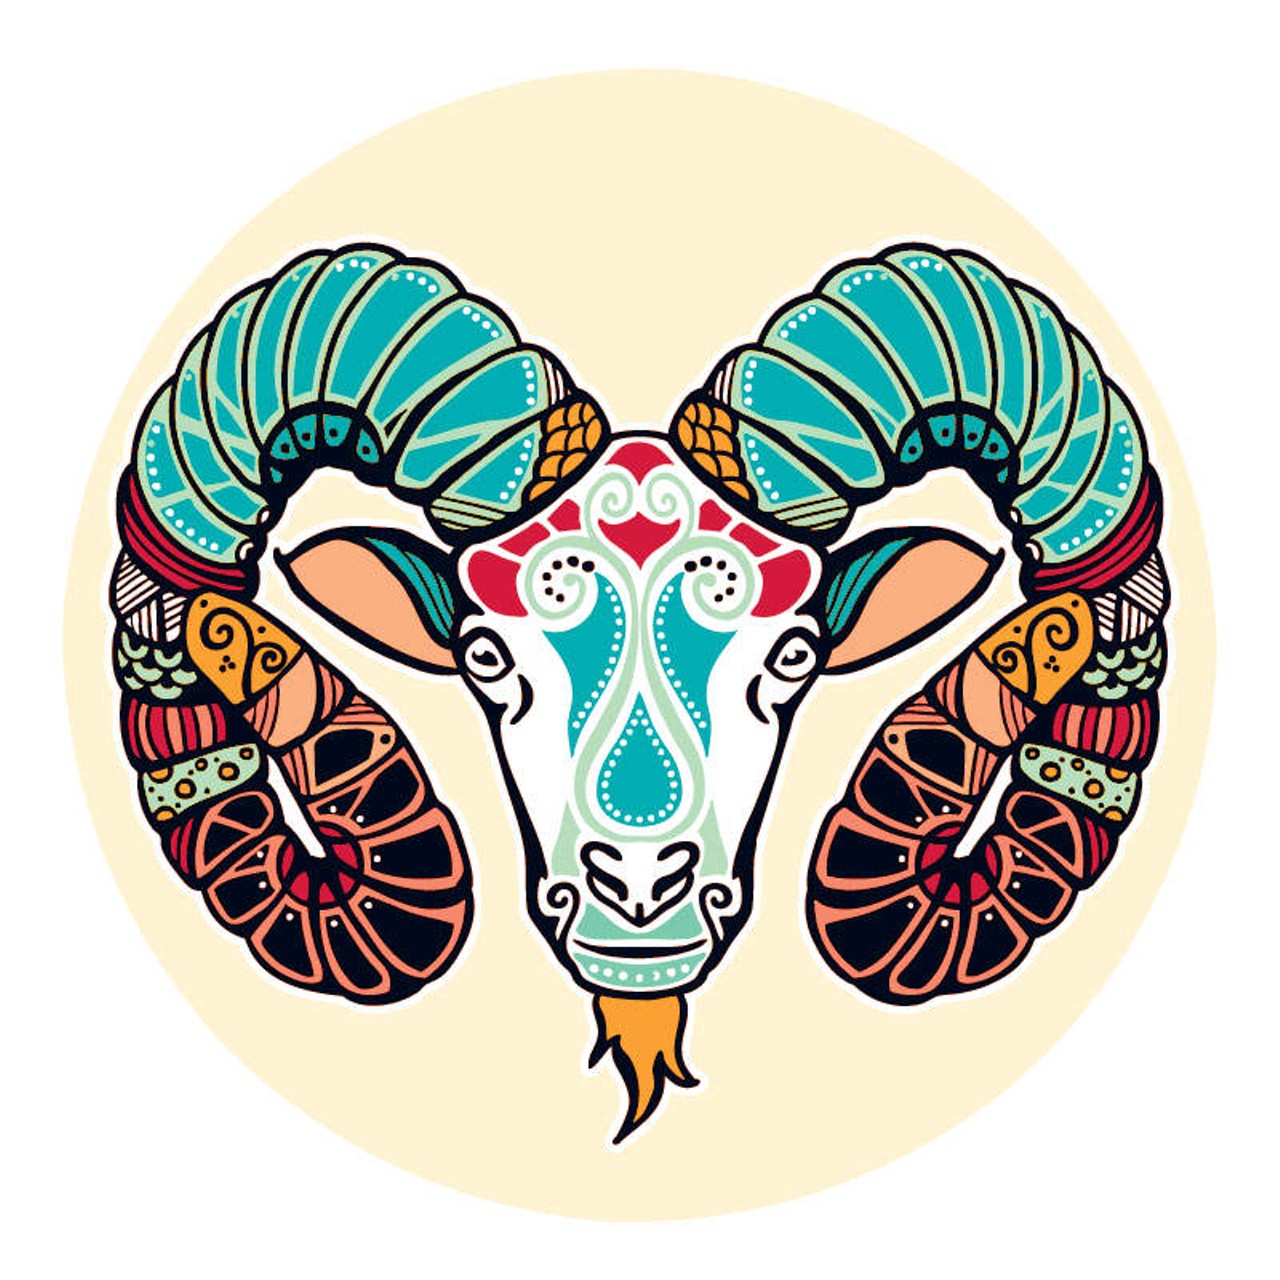 ARIES: March 21 &#150; April 20
In the middle of one of those rock and a hard place, make it or break it scenarios, there's not much you can do but show up totally on top of things with your spirit present and accounted for. You have done everything you can do to move this mountain. Where it goes from here? Don't let your expectations limit the realm of possibilities. None of this is up to you; stop thinking &#151; just keep shining. What will it take to meet fulfillment? Check in with your heart. This week it comes down to being poised on the crest of a wave, with nothing but faith between you and the shore.